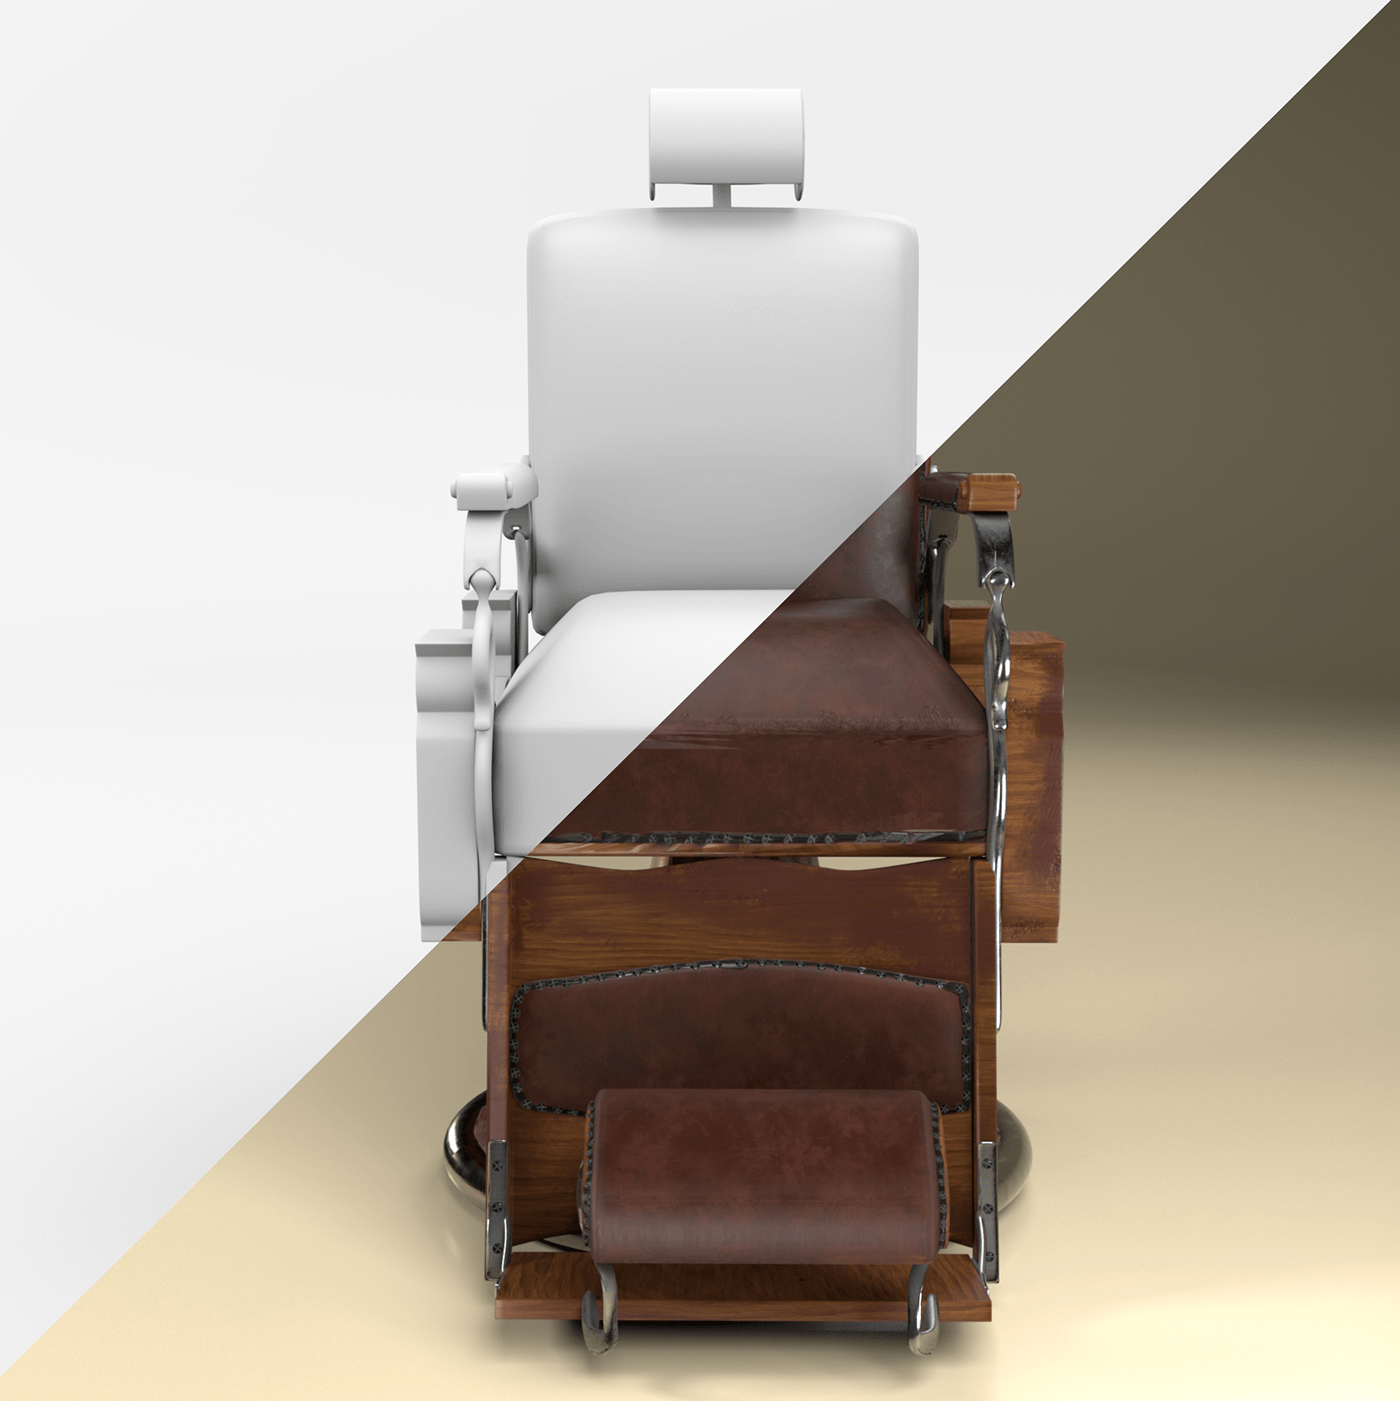 3d modeling 3dart chair Maya wood leather texturing photoshop Arnold Render subtance painter